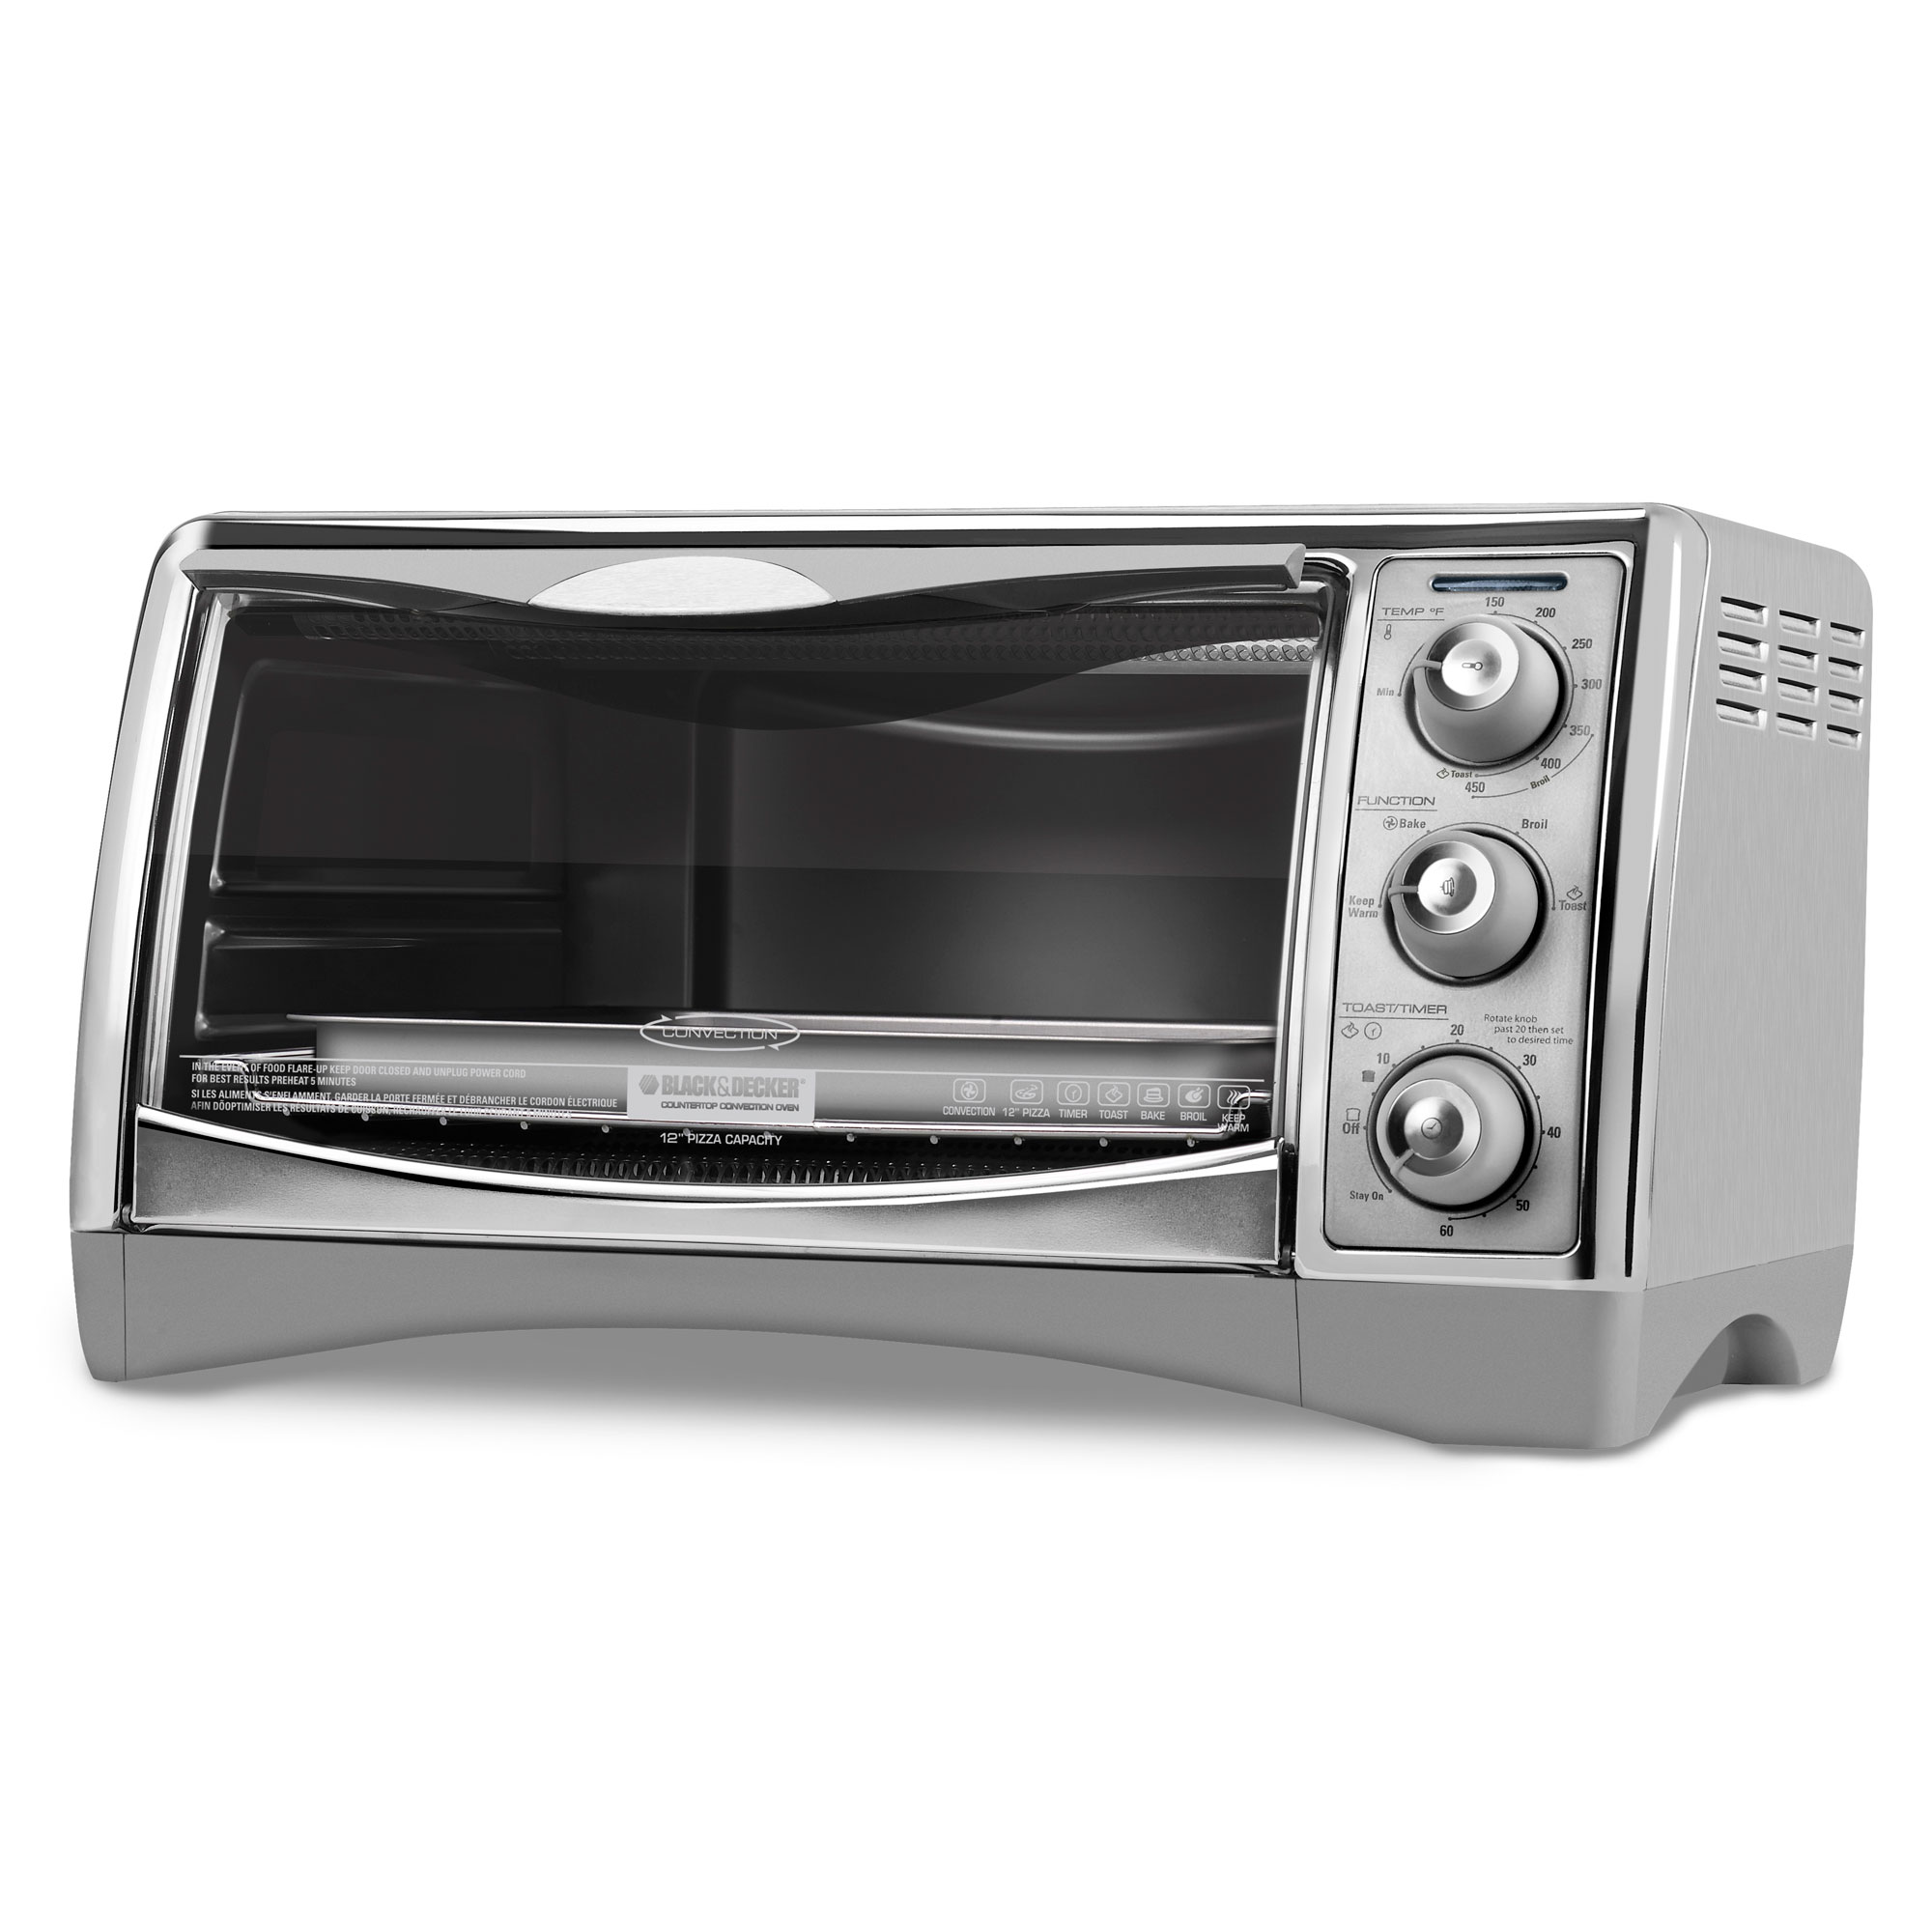 https://s7cdn.spectrumbrands.com/~/media/SmallAppliancesUS/Black%20and%20Decker/Product%20Page/cooking%20appliances/convection%20and%20toaster%20ovens/CTO4500S/CTO4500S.jpg?h=2000&la=en&w=2000